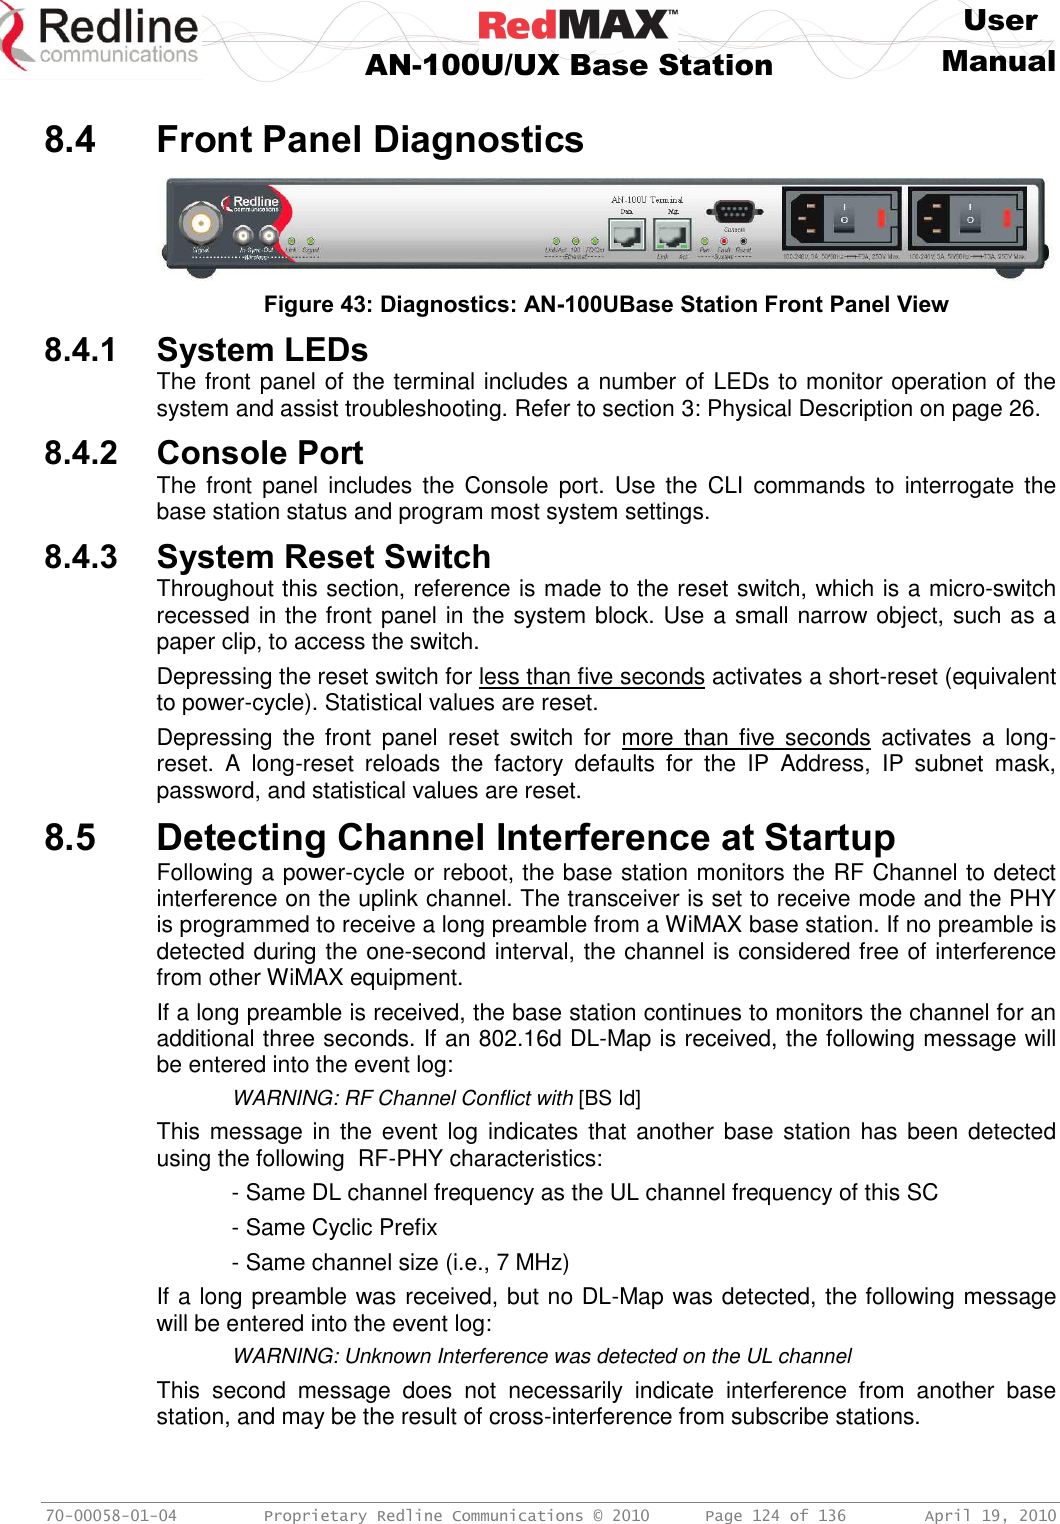     User  AN-100U/UX Base Station Manual   70-00058-01-04  Proprietary Redline Communications © 2010   Page 124 of 136  April 19, 2010  8.4 Front Panel Diagnostics   Figure 43: Diagnostics: AN-100UBase Station Front Panel View 8.4.1 System LEDs The front panel of the terminal includes a number of LEDs to monitor operation of the system and assist troubleshooting. Refer to section 3: Physical Description on page 26. 8.4.2 Console Port The  front  panel  includes the  Console  port.  Use  the  CLI  commands to  interrogate  the base station status and program most system settings. 8.4.3 System Reset Switch Throughout this section, reference is made to the reset switch, which is a micro-switch recessed in the front panel in the system block. Use a small narrow object, such as a paper clip, to access the switch. Depressing the reset switch for less than five seconds activates a short-reset (equivalent to power-cycle). Statistical values are reset. Depressing  the  front  panel  reset  switch  for  more  than  five  seconds  activates  a  long-reset.  A  long-reset  reloads  the  factory  defaults  for  the  IP  Address,  IP  subnet  mask, password, and statistical values are reset. 8.5 Detecting Channel Interference at Startup Following a power-cycle or reboot, the base station monitors the RF Channel to detect interference on the uplink channel. The transceiver is set to receive mode and the PHY is programmed to receive a long preamble from a WiMAX base station. If no preamble is detected during the one-second interval, the channel is considered free of interference from other WiMAX equipment. If a long preamble is received, the base station continues to monitors the channel for an additional three seconds. If an 802.16d DL-Map is received, the following message will be entered into the event log:   WARNING: RF Channel Conflict with [BS Id] This message in  the event log  indicates that  another  base  station has been detected using the following  RF-PHY characteristics:   - Same DL channel frequency as the UL channel frequency of this SC   - Same Cyclic Prefix   - Same channel size (i.e., 7 MHz) If a long preamble was received, but no DL-Map was detected, the following message will be entered into the event log:  WARNING: Unknown Interference was detected on the UL channel This  second  message  does  not  necessarily  indicate  interference  from  another  base station, and may be the result of cross-interference from subscribe stations. 